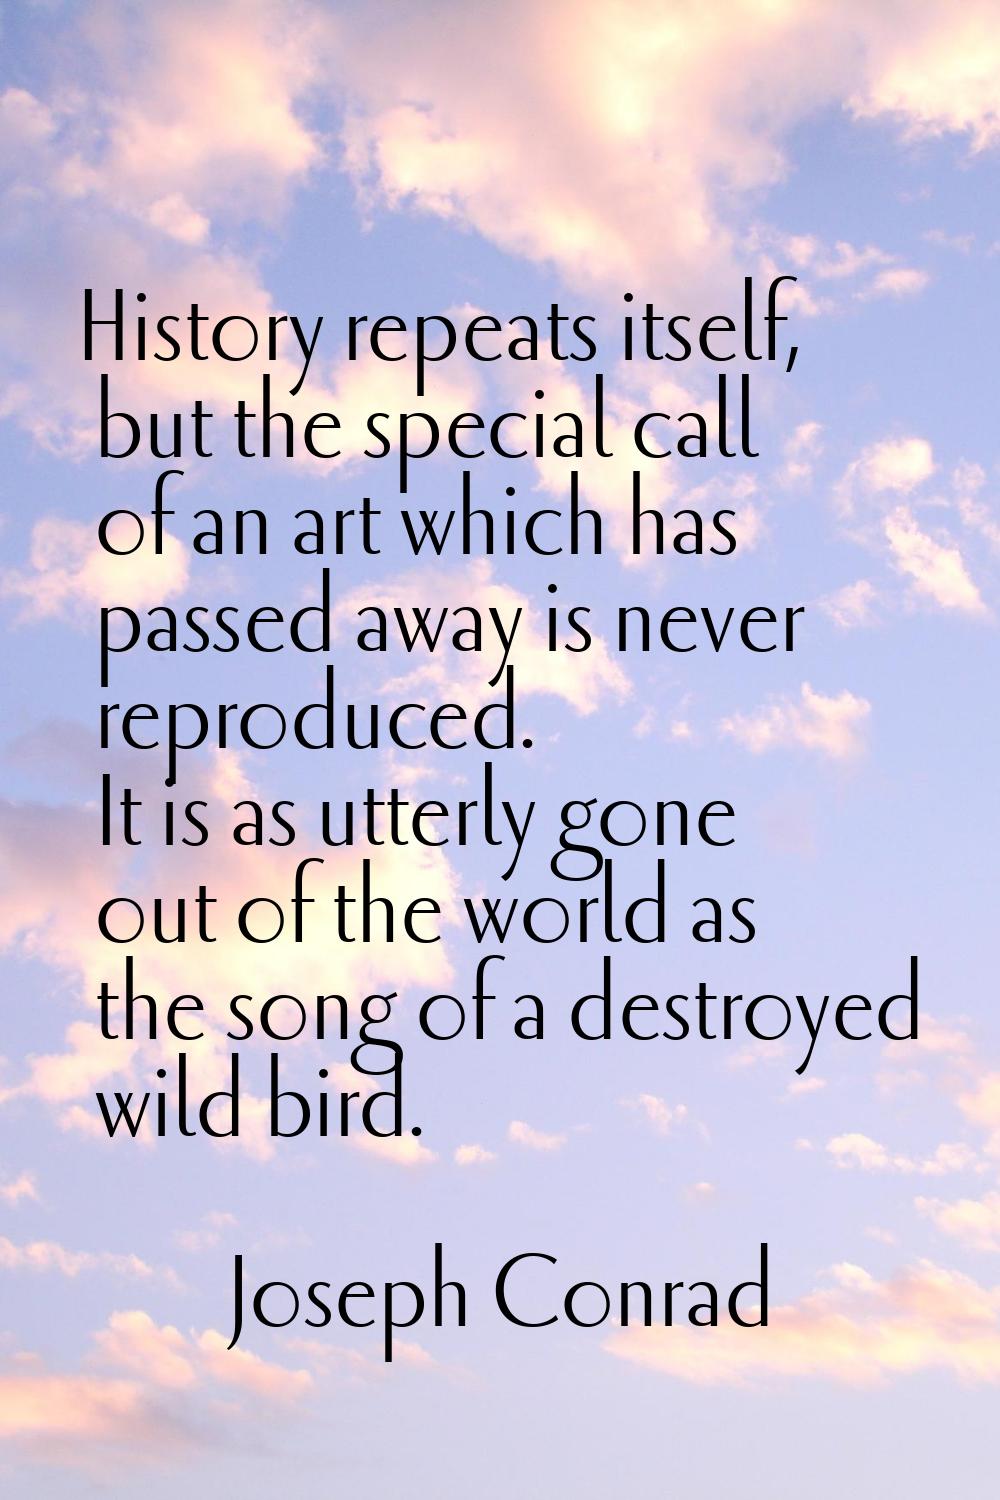 History repeats itself, but the special call of an art which has passed away is never reproduced. I